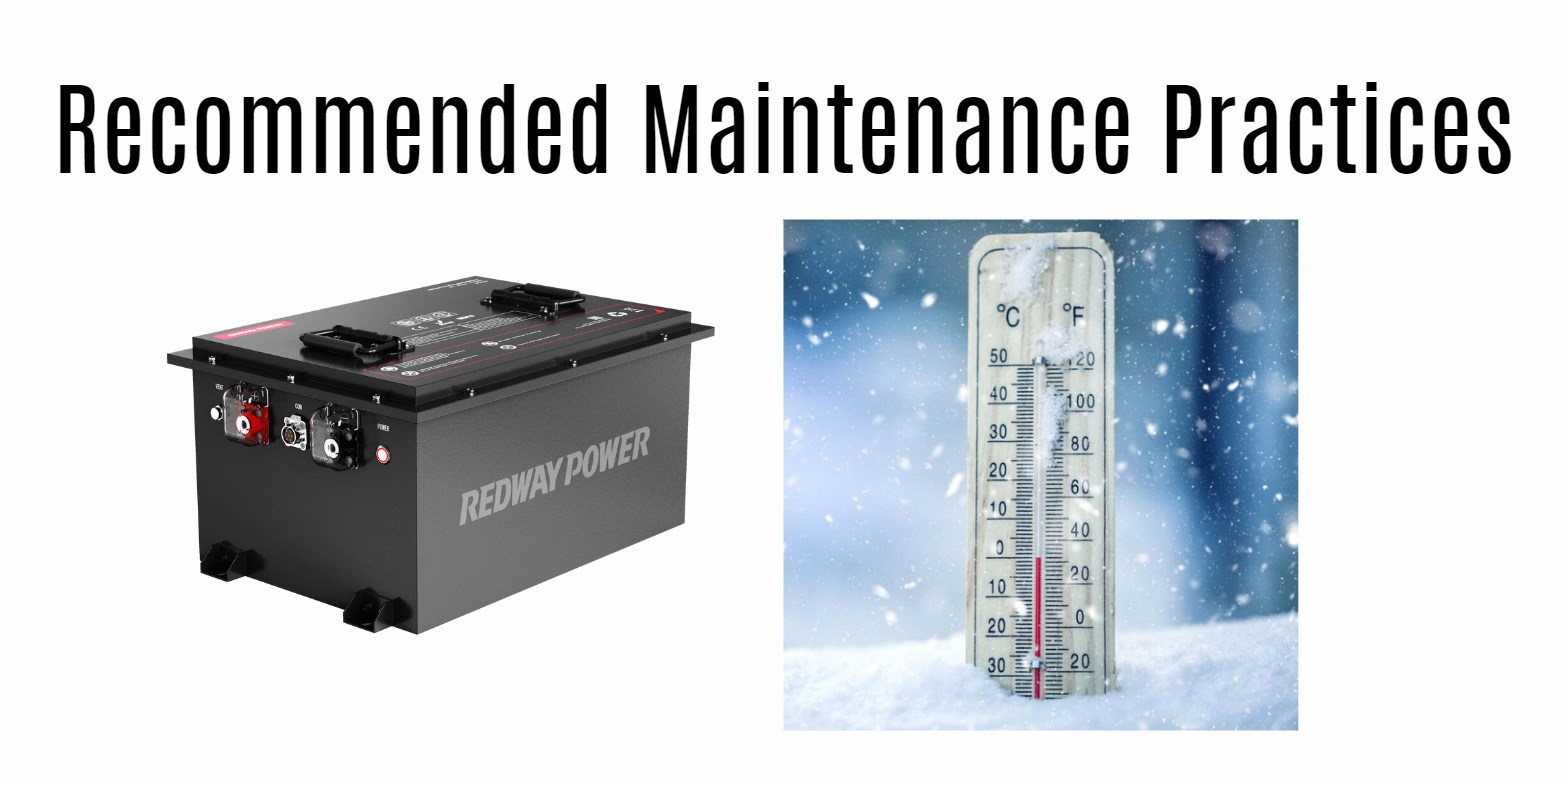 Recommended Maintenance Practices